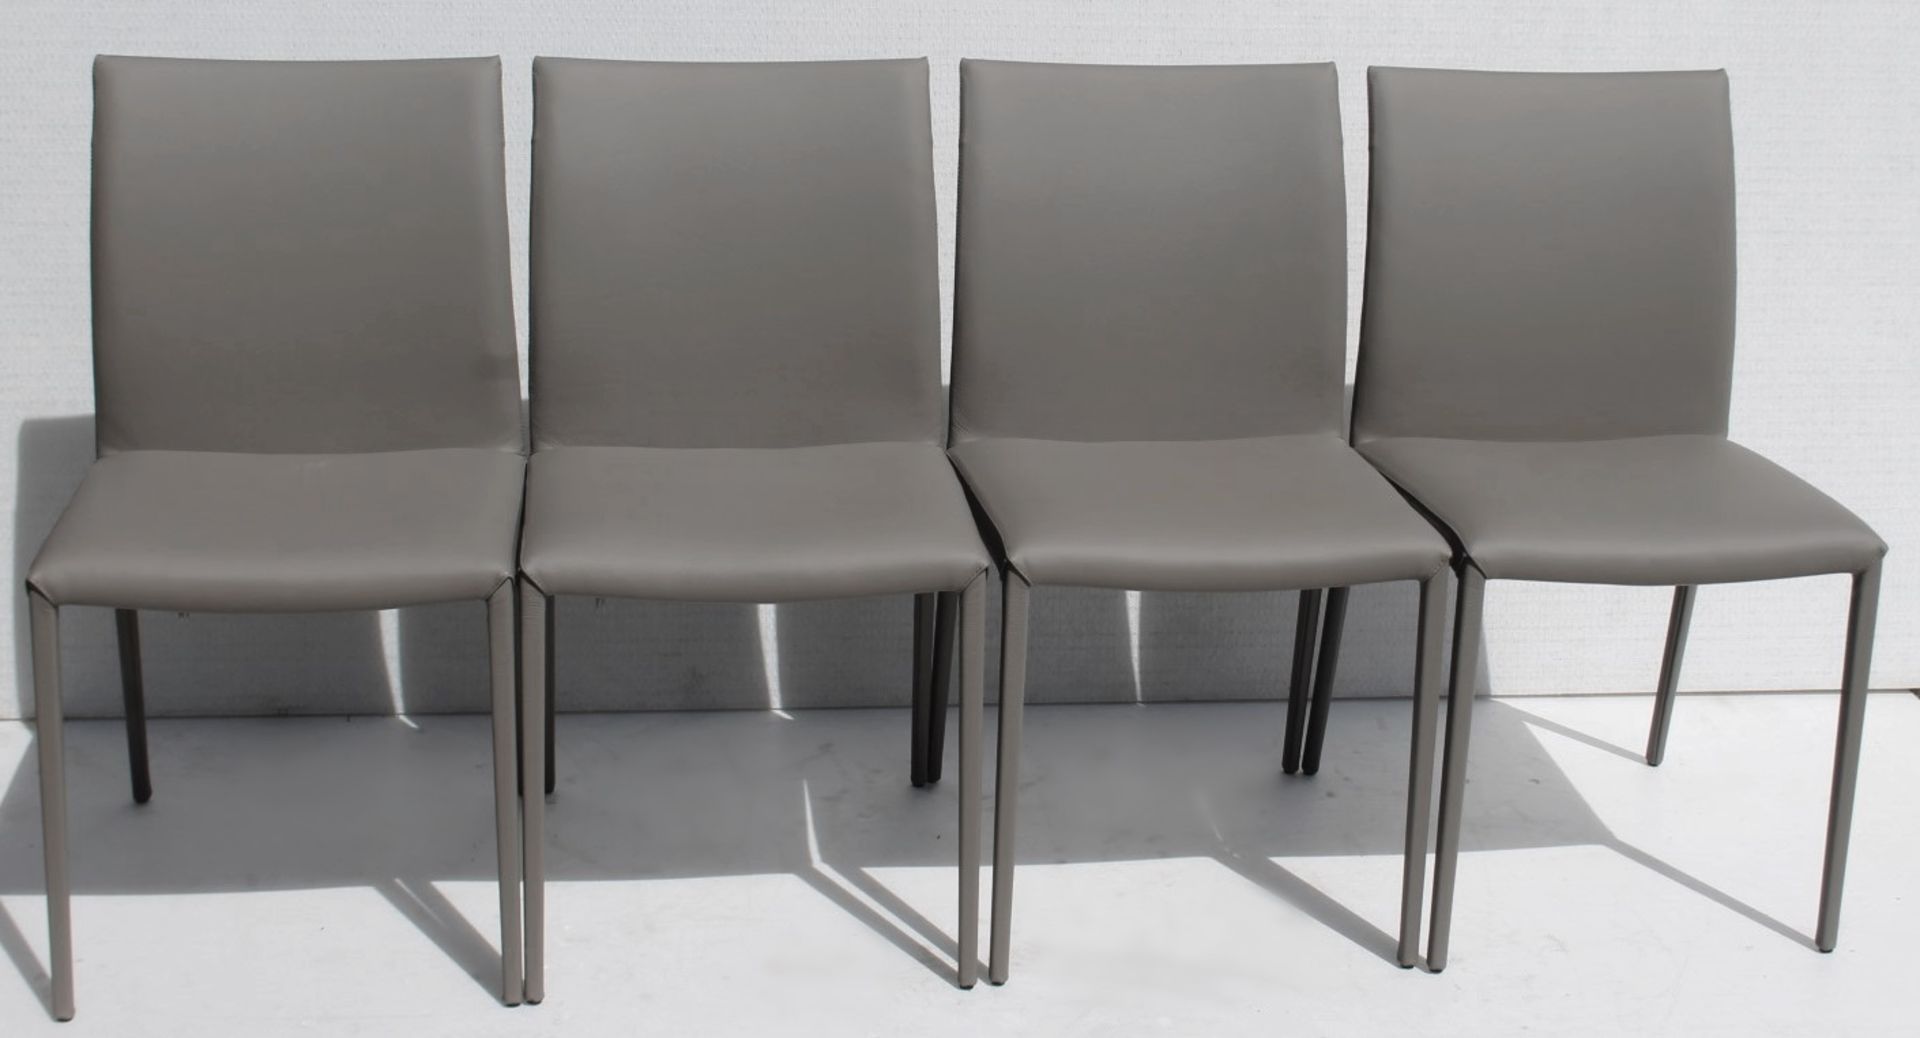 4 x CATELLAN 'Norma' Designer Italian Dining Chairs In Soft Grey Leather - Original RRP £3,840 - Image 5 of 7